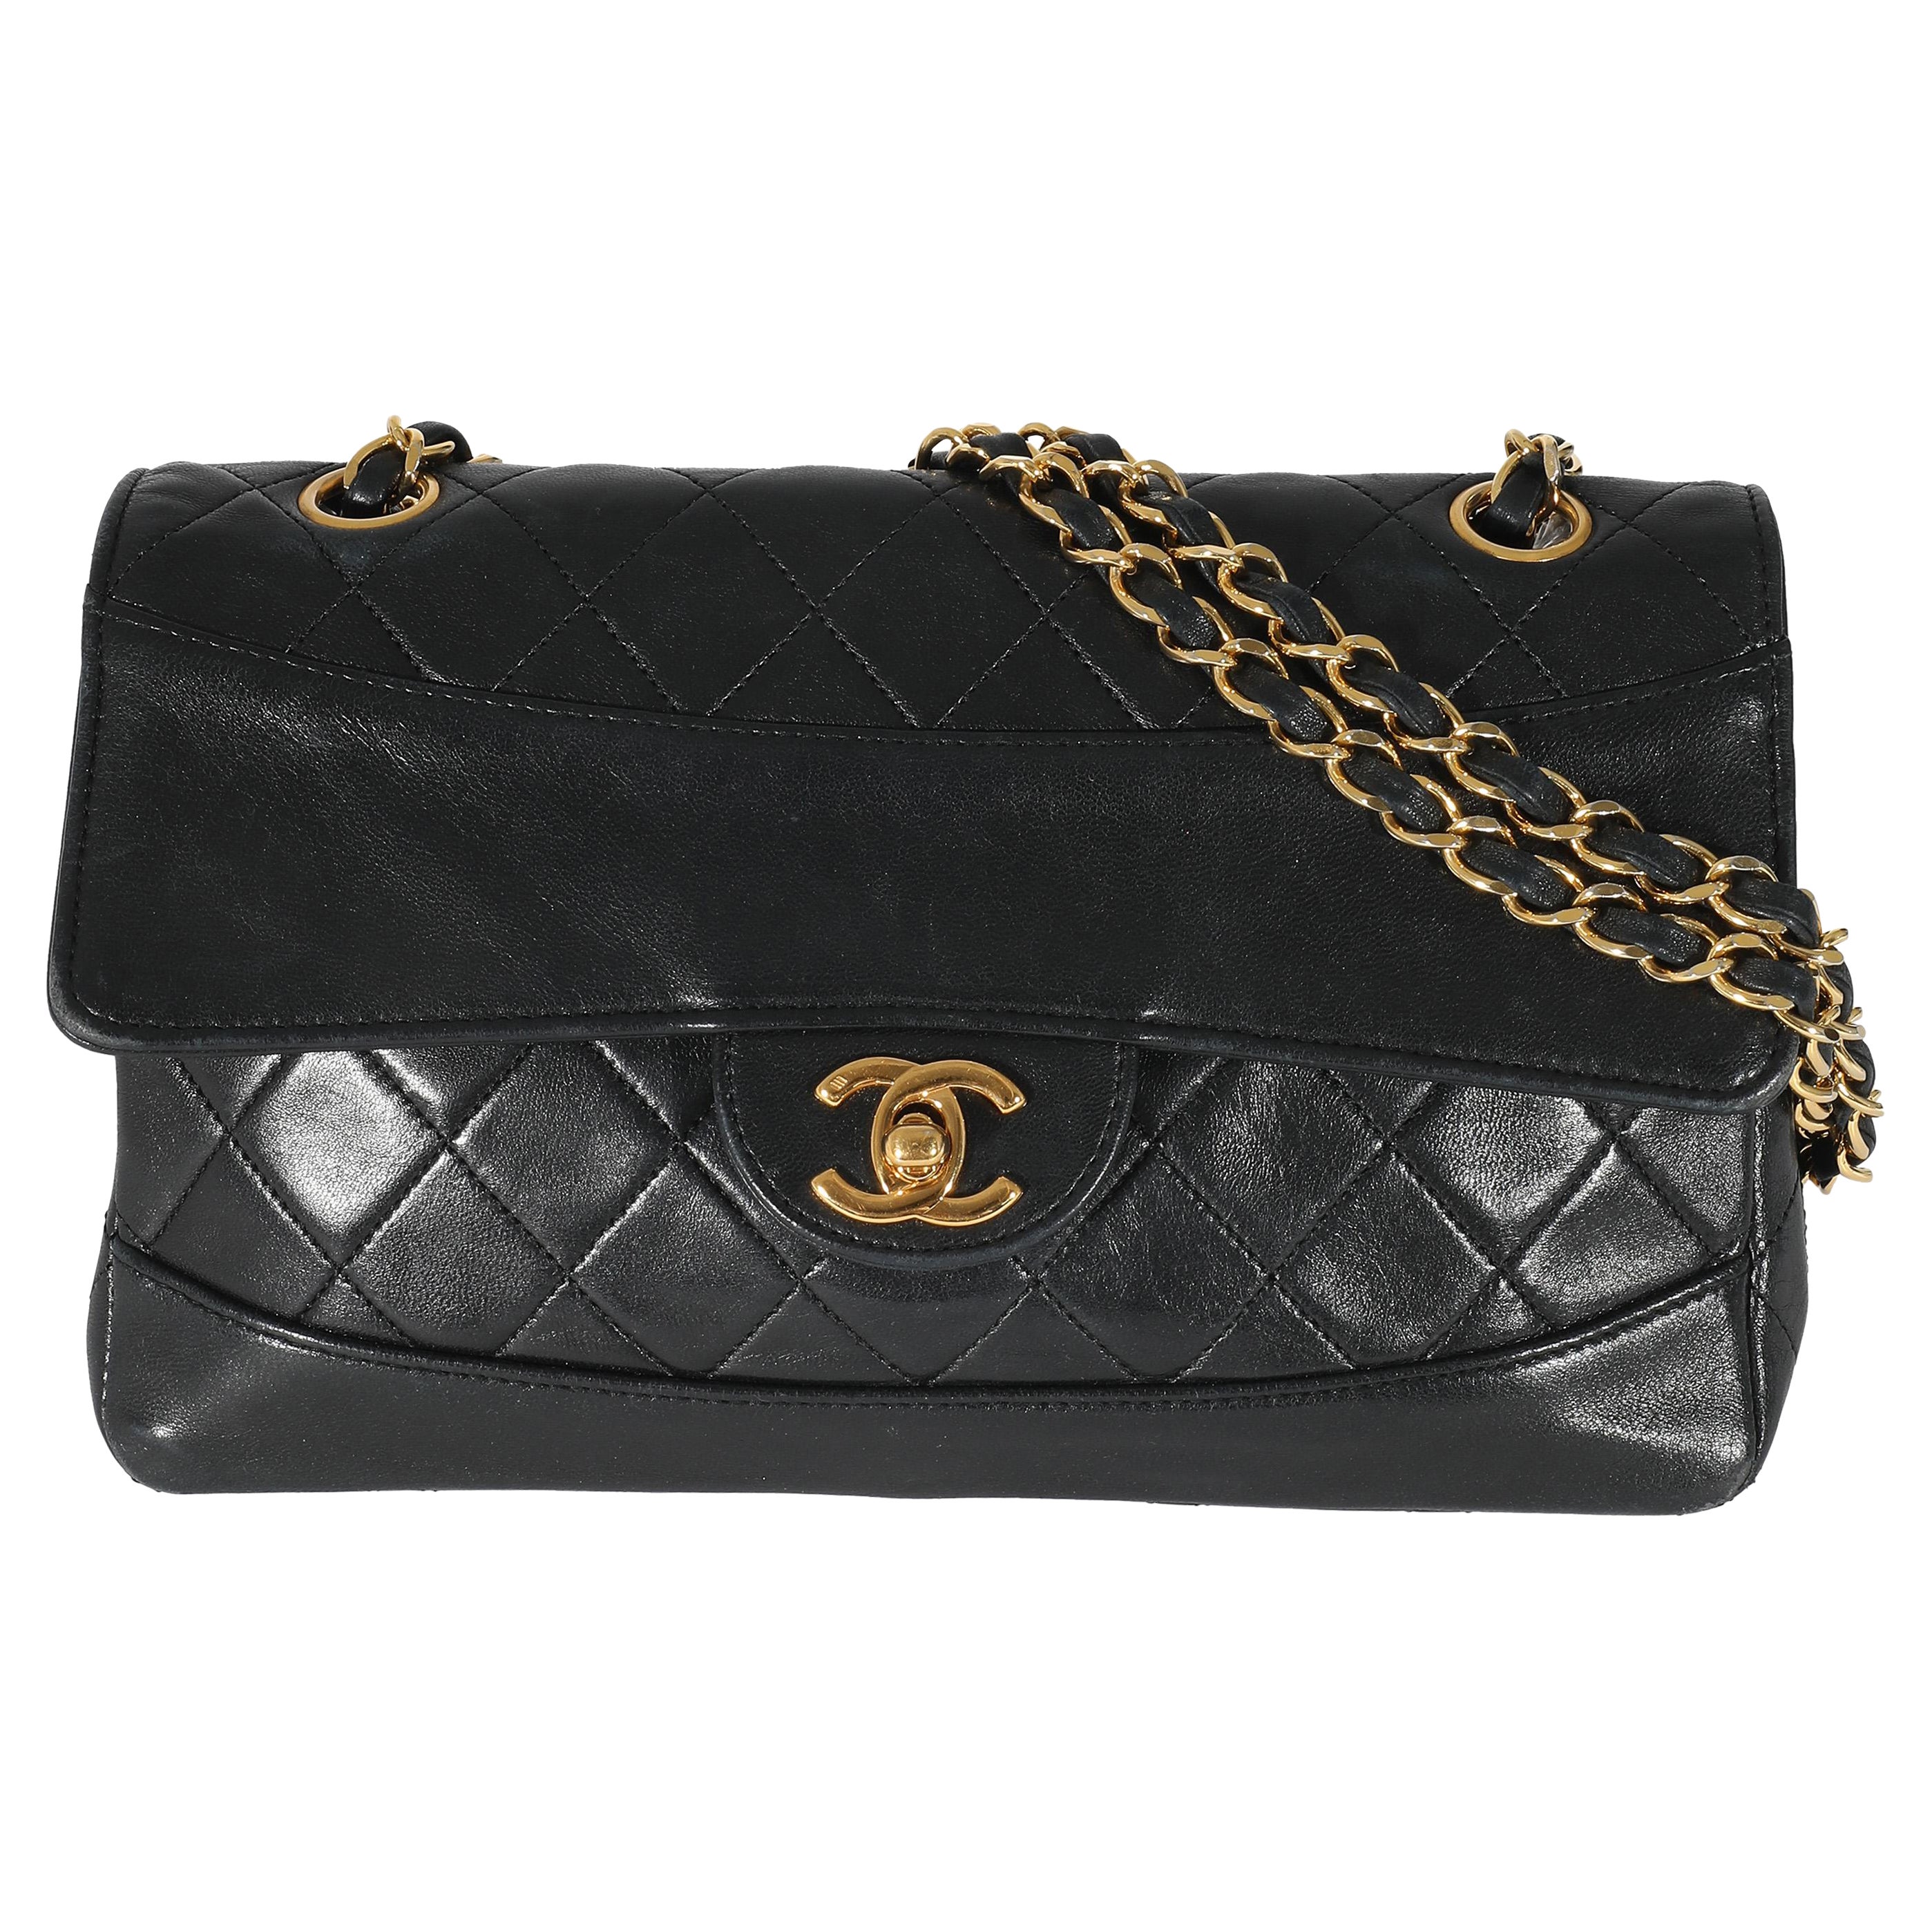 CHANEL Quilted Single Flap Chain Shoulder Bag 1994 - 1996